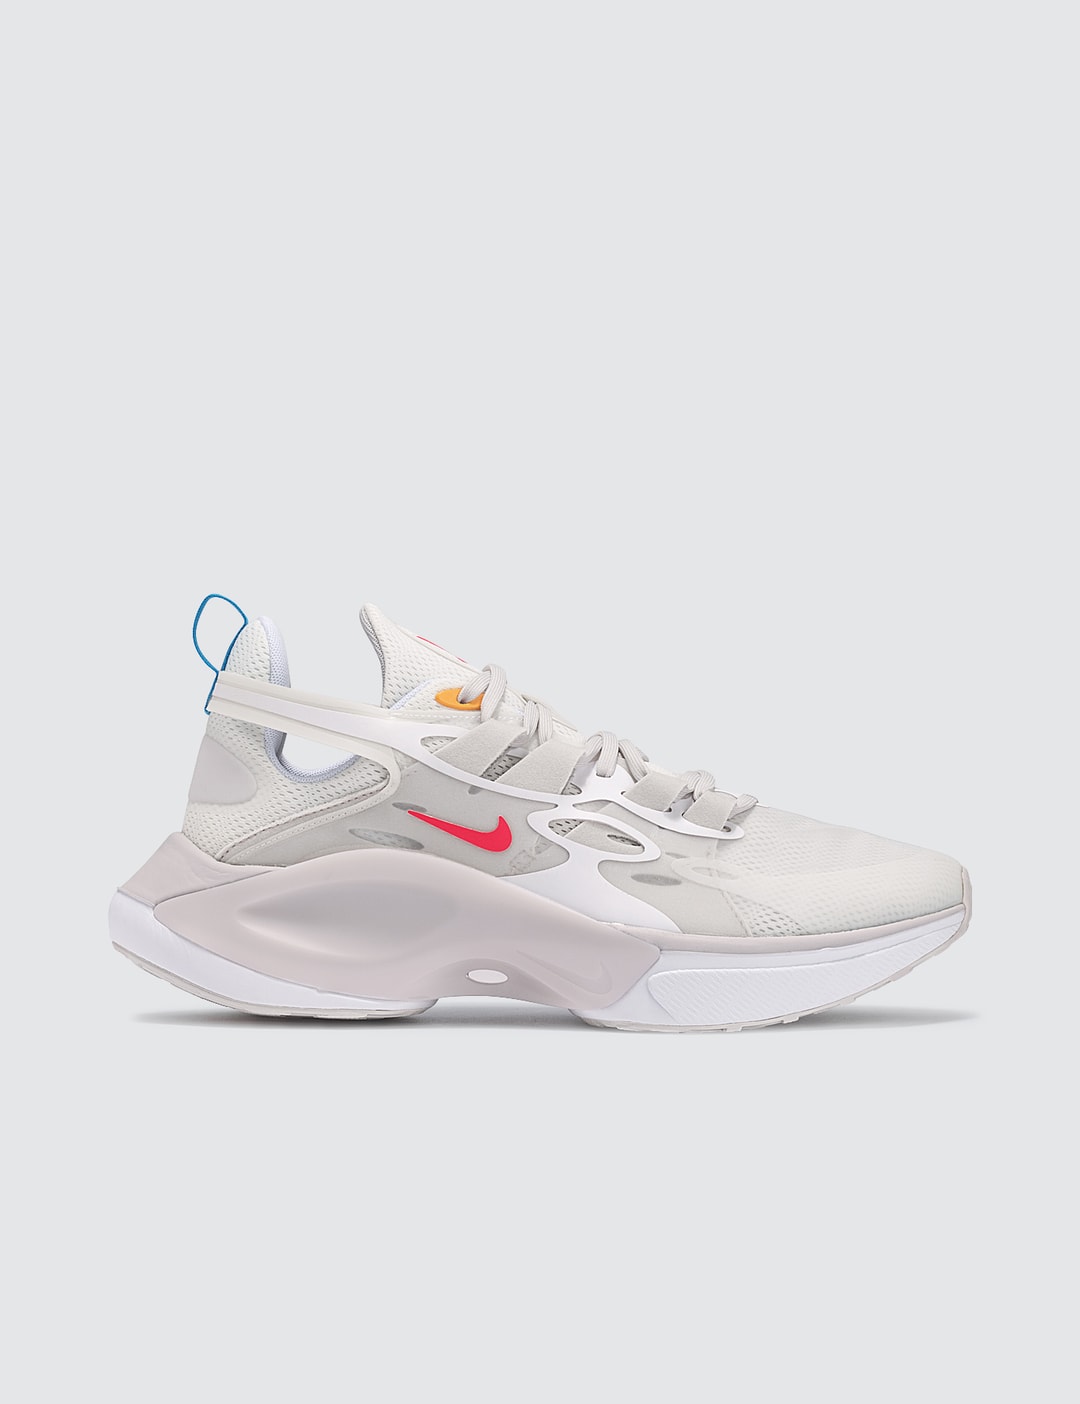 Nike - Nike Signal D/MS/X | HBX - Globally Fashion and Lifestyle by Hypebeast